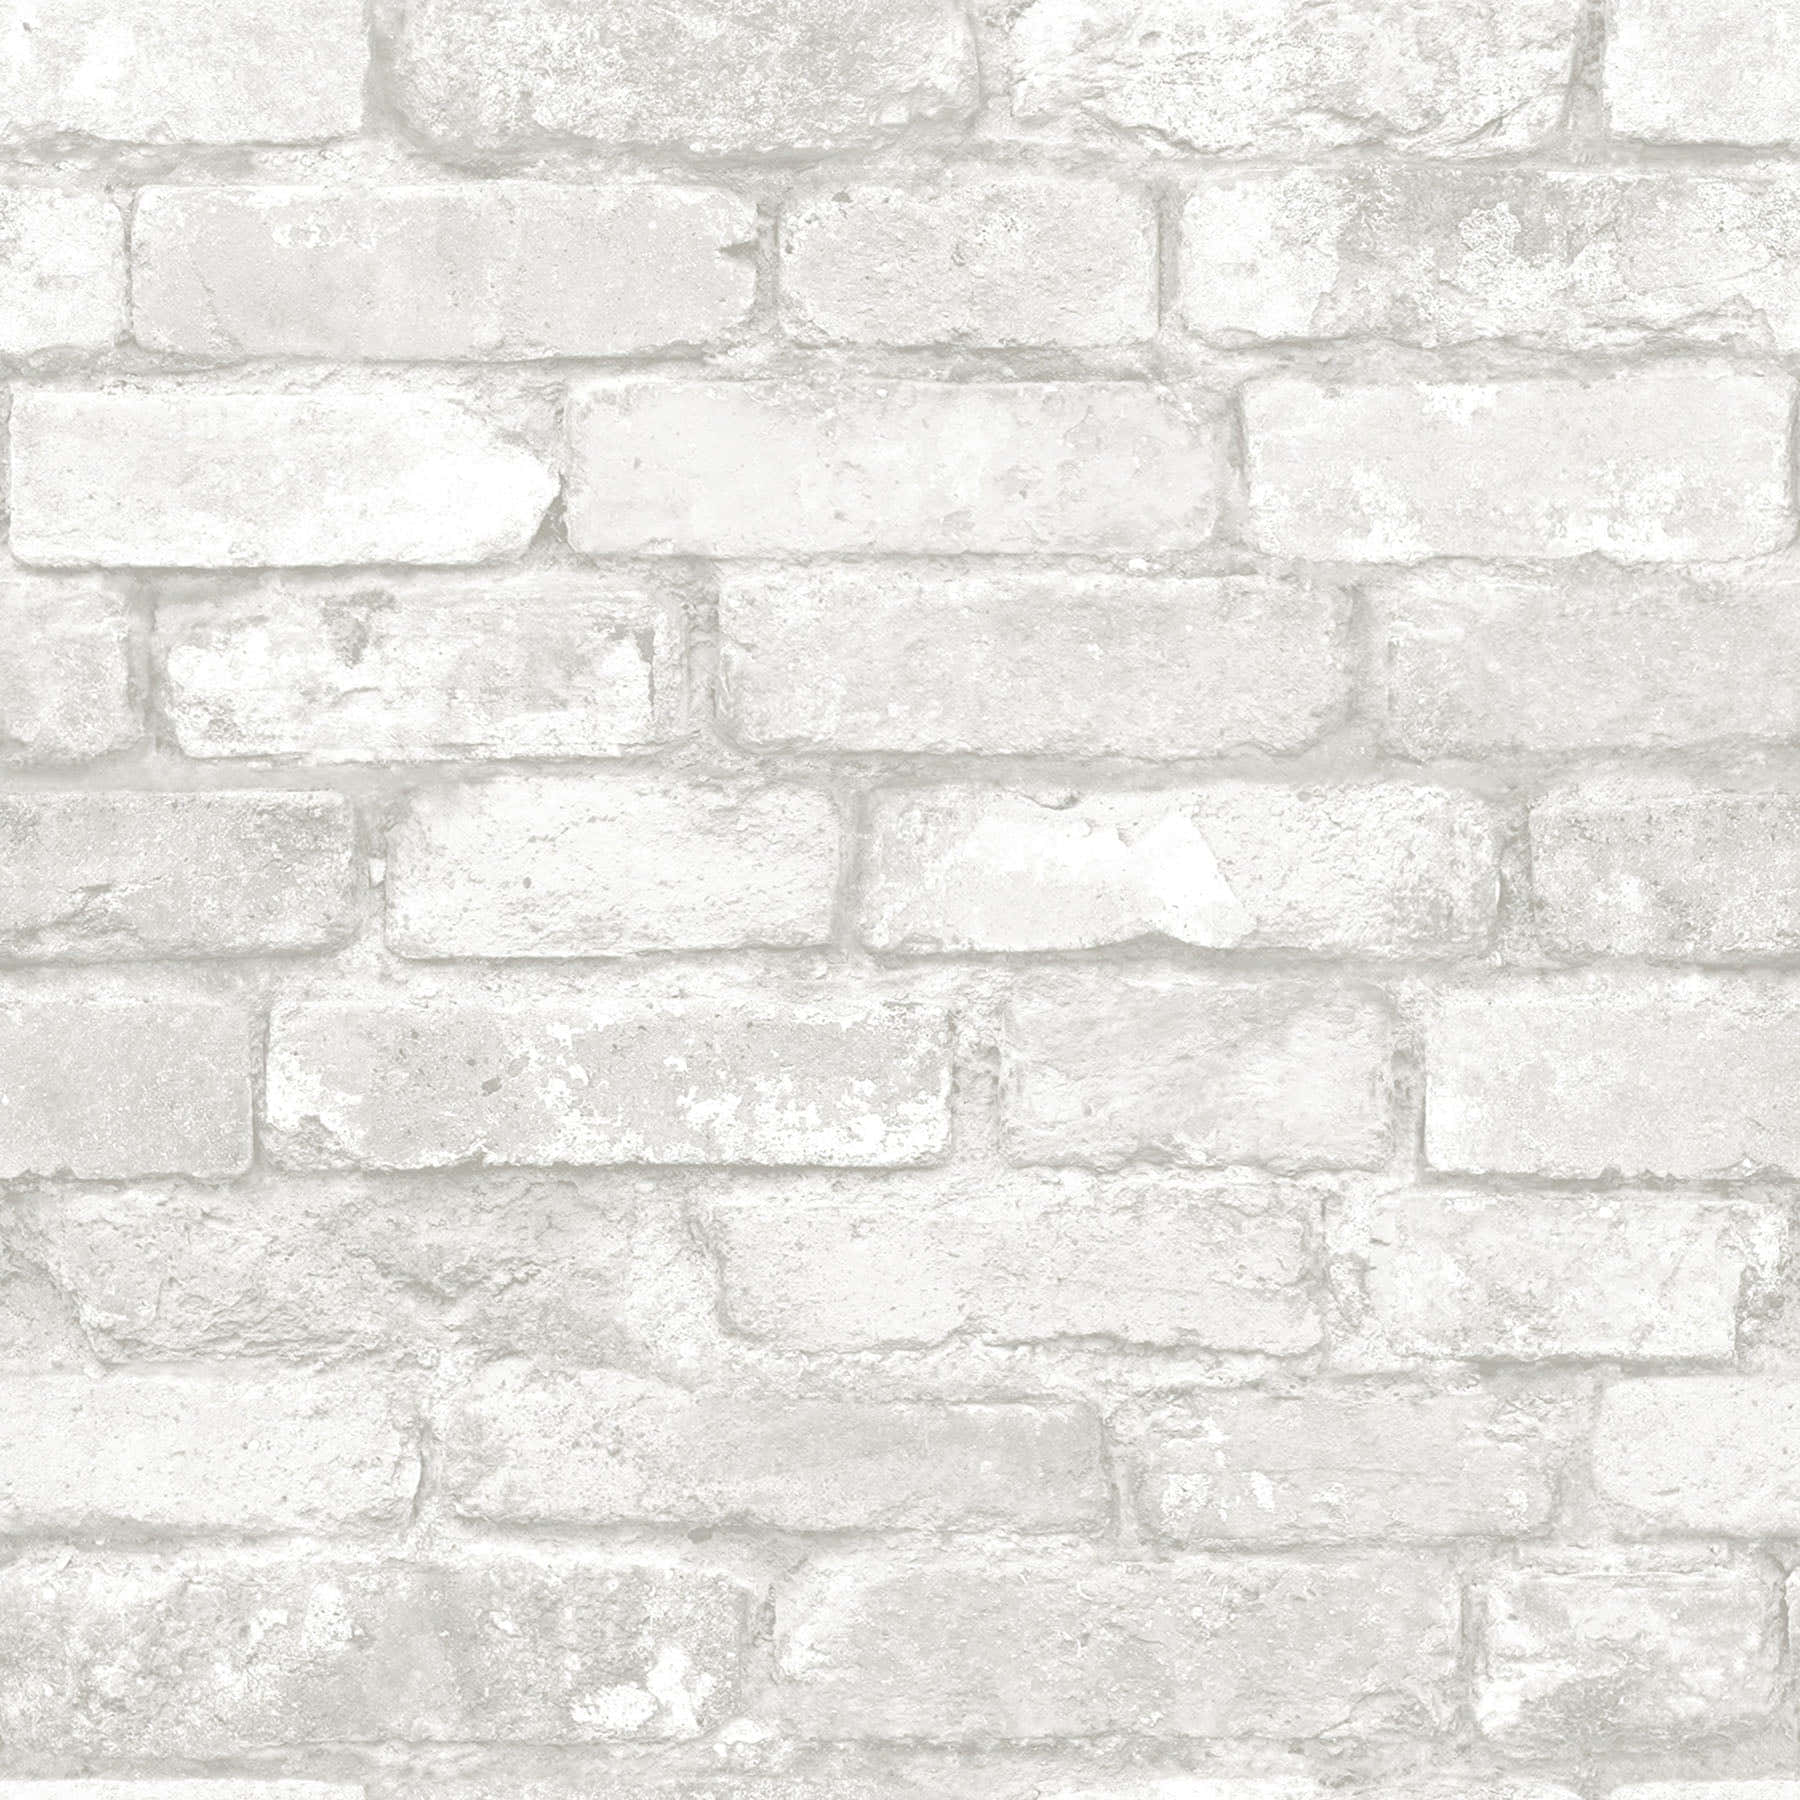 Vintage Red Brick Wall Background